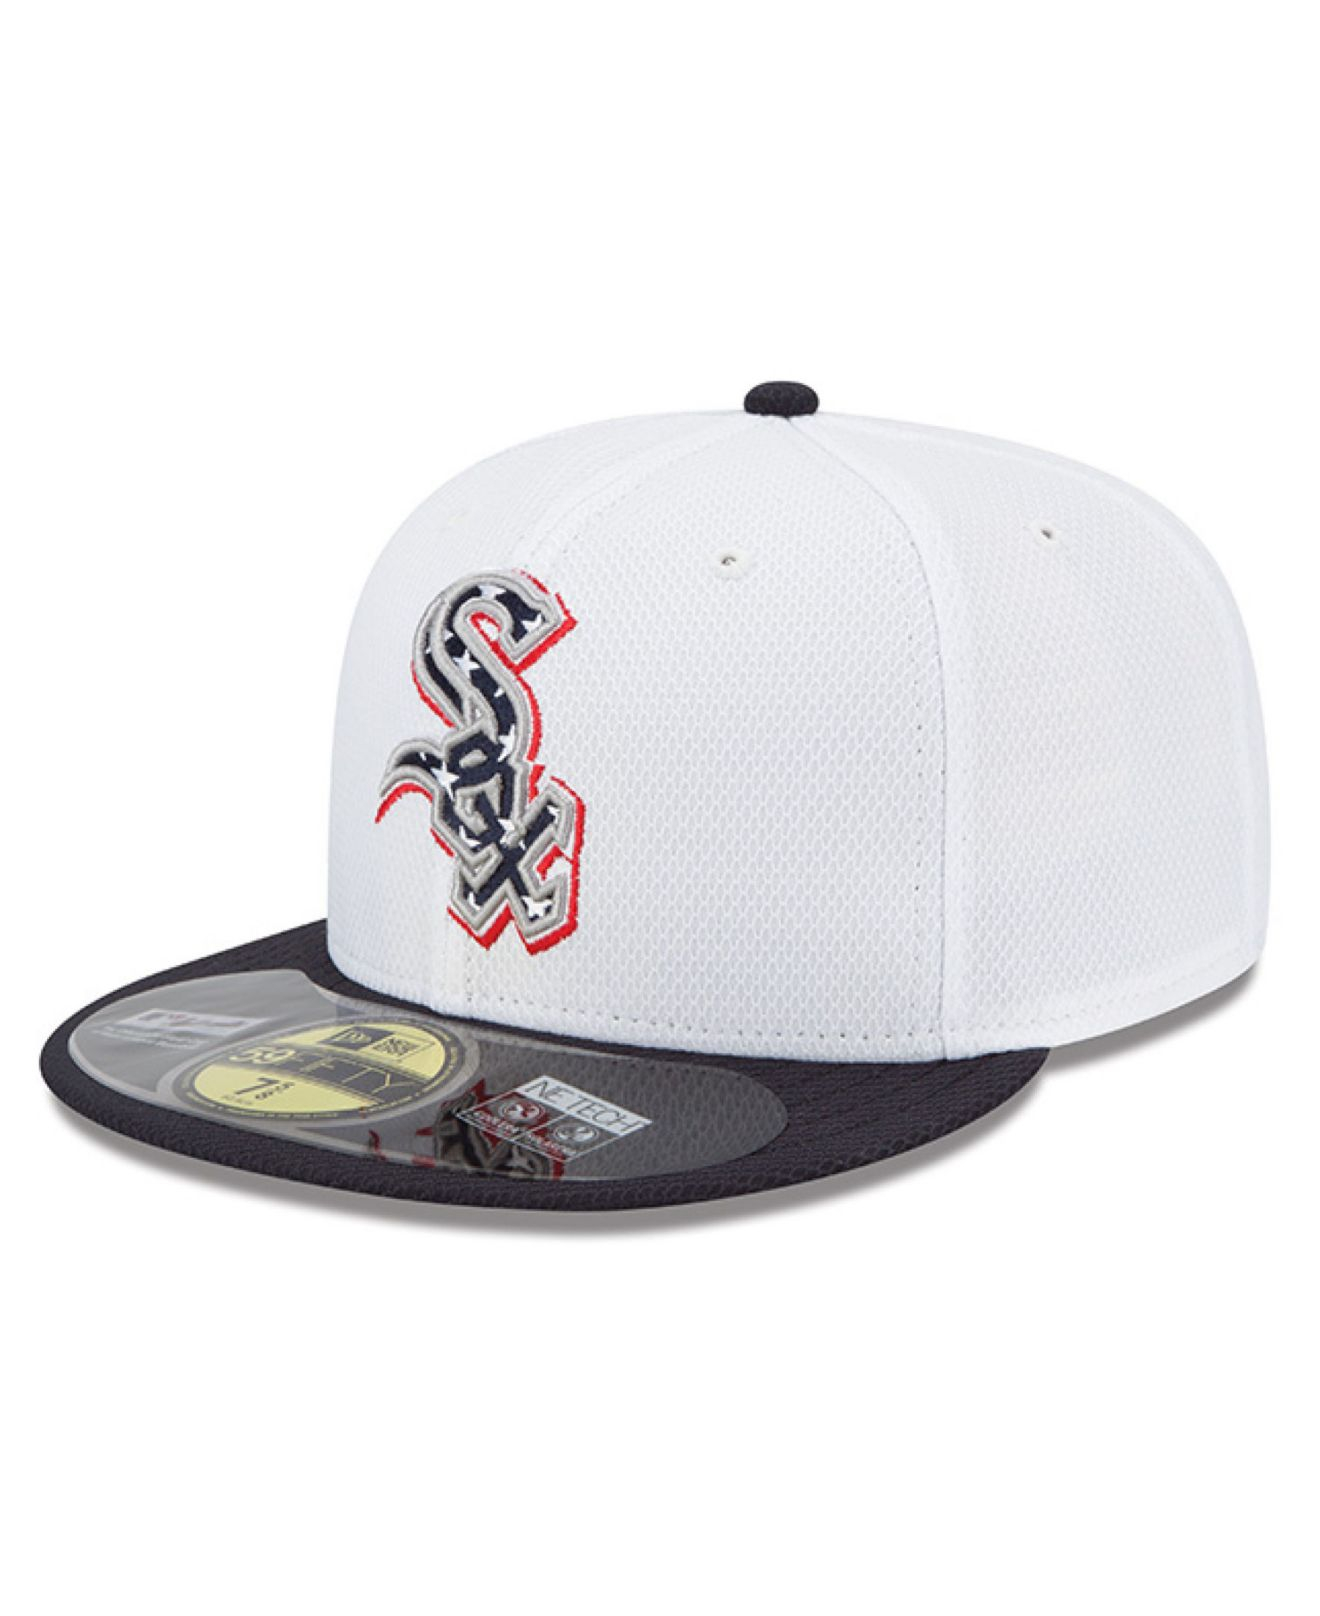 Dicks white sox stars and stripes hats